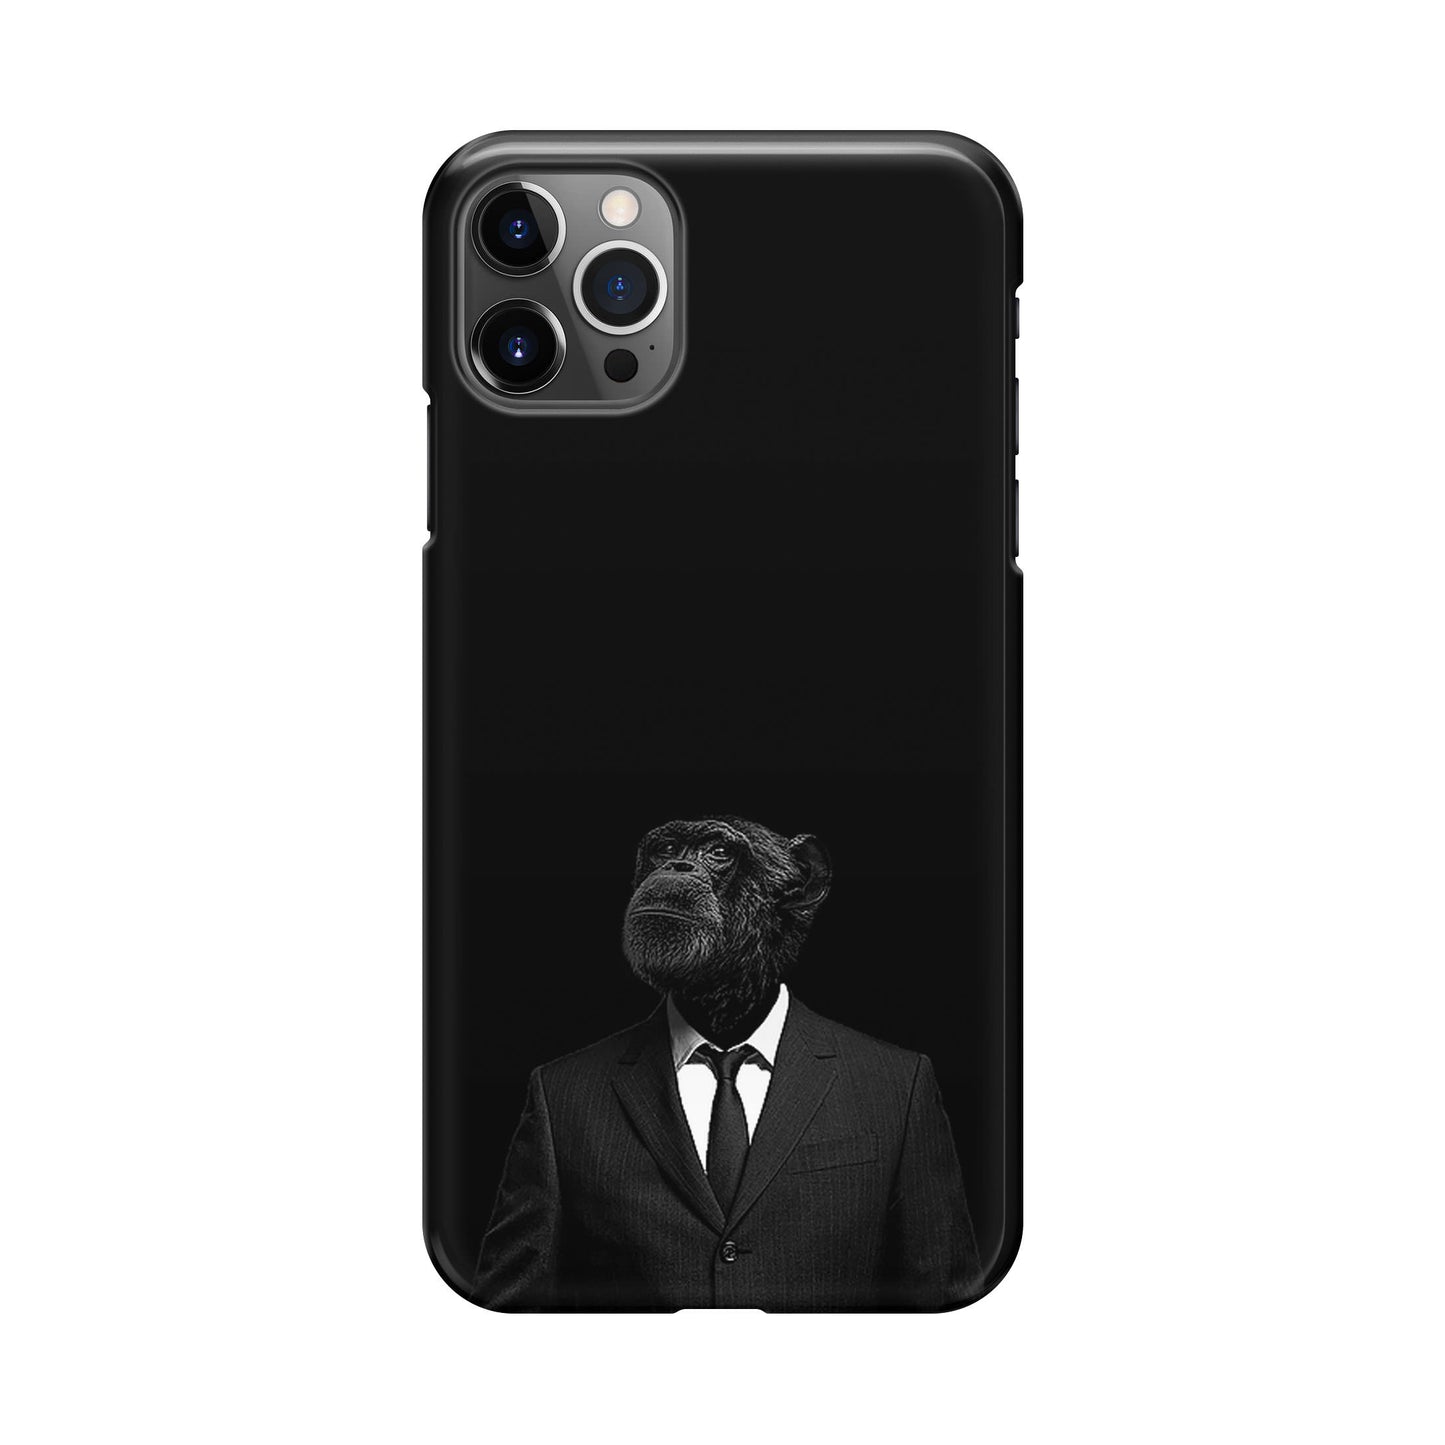 The Interview Ape iPhone 12 Pro Case